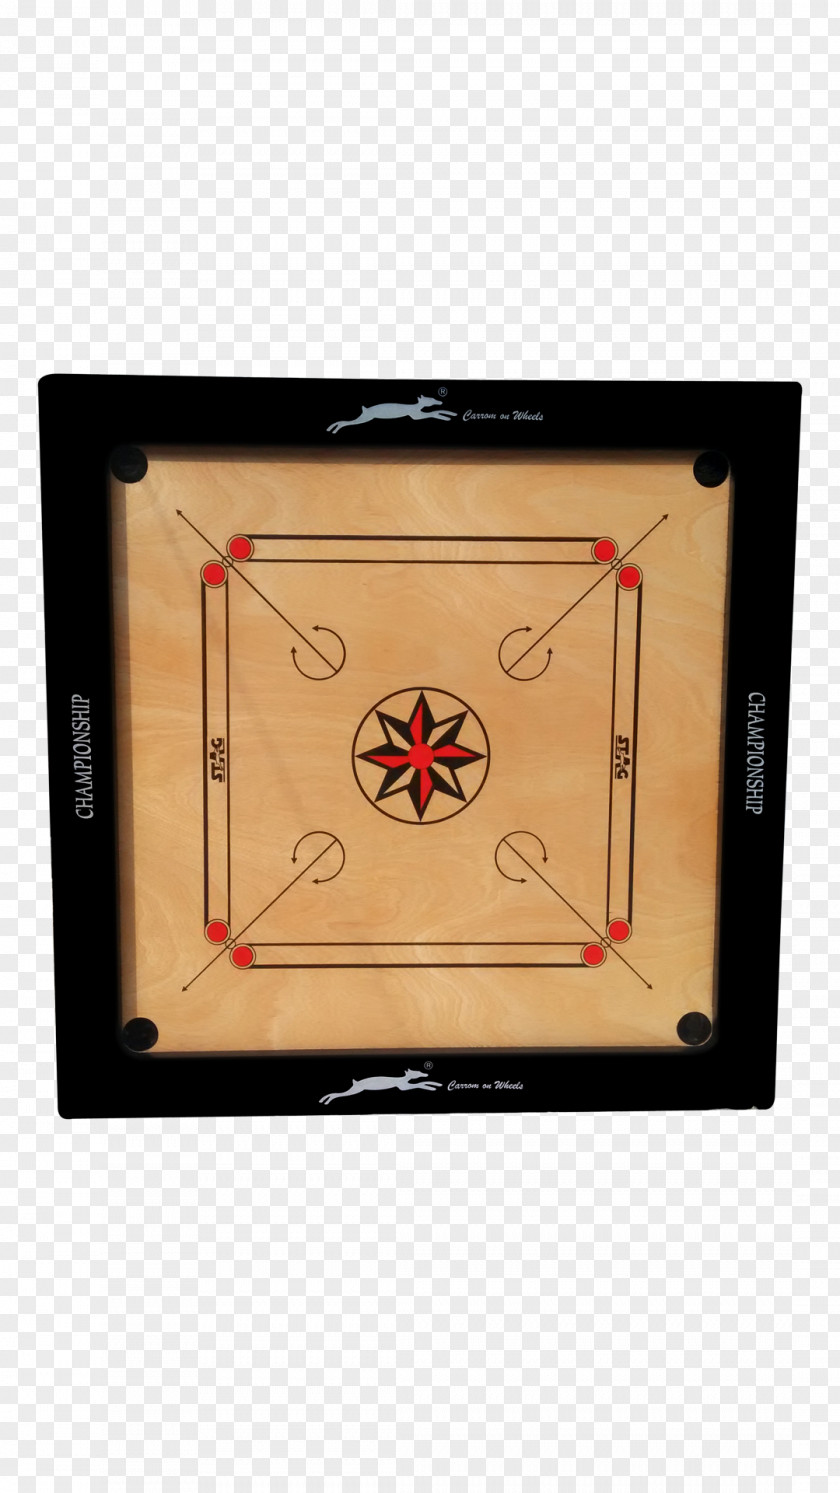 Carom Carrom Board Game Online Shopping Paytm PNG